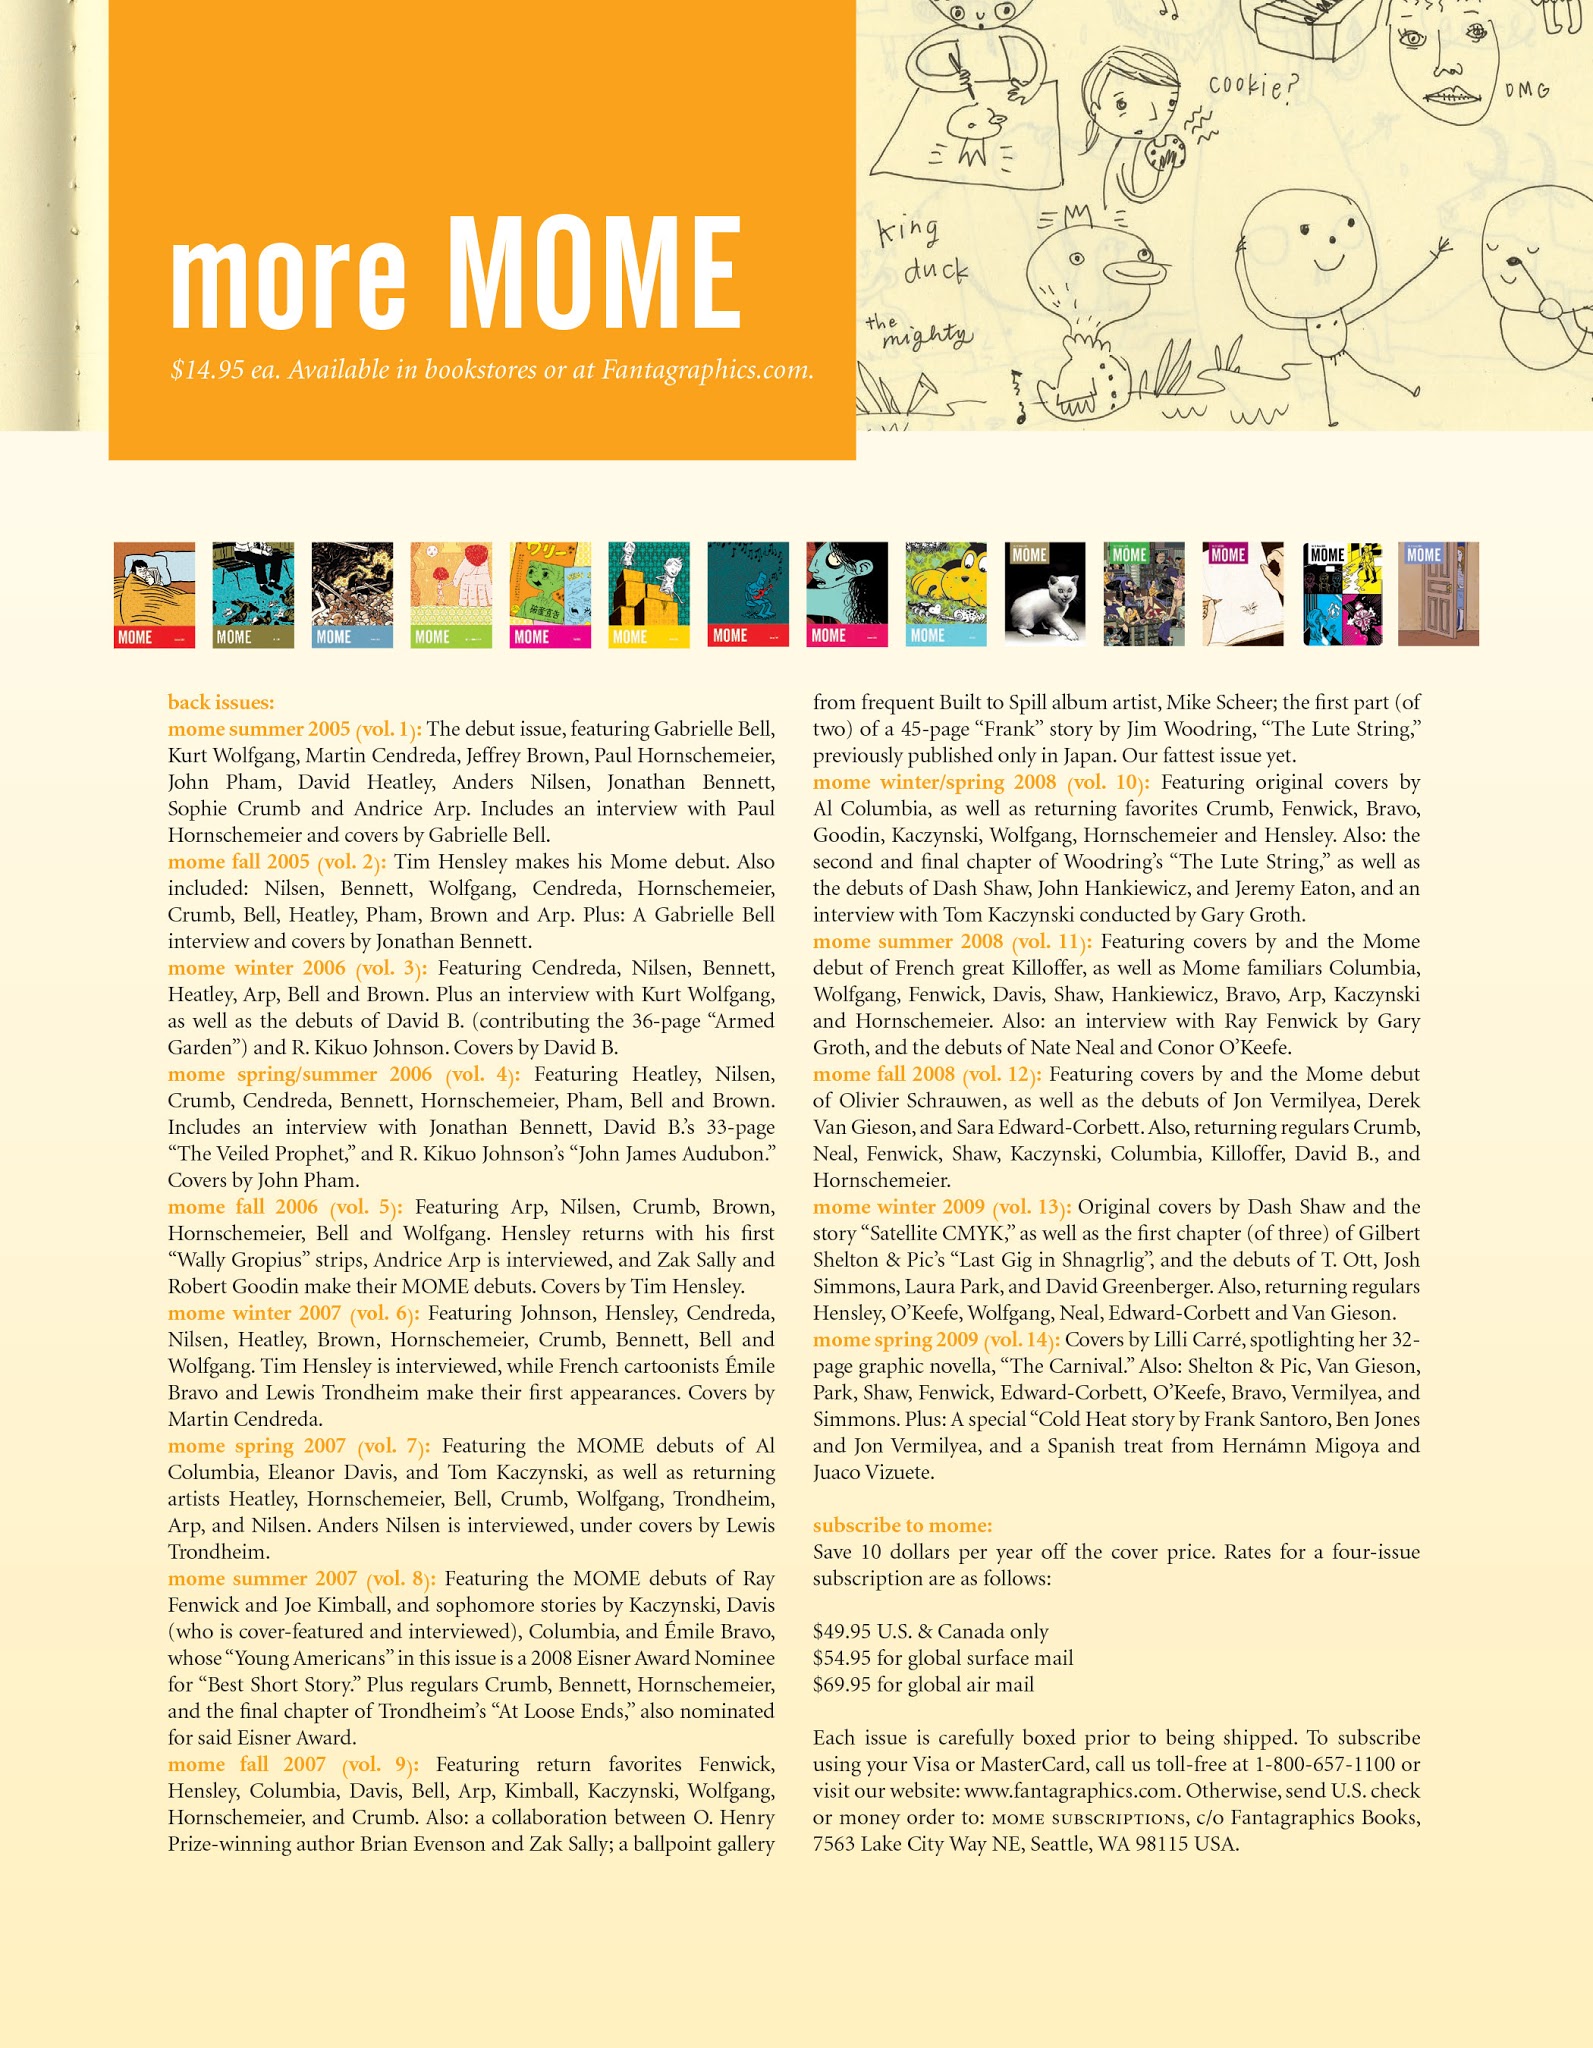 Read online Mome comic -  Issue # TPB 15 - 5